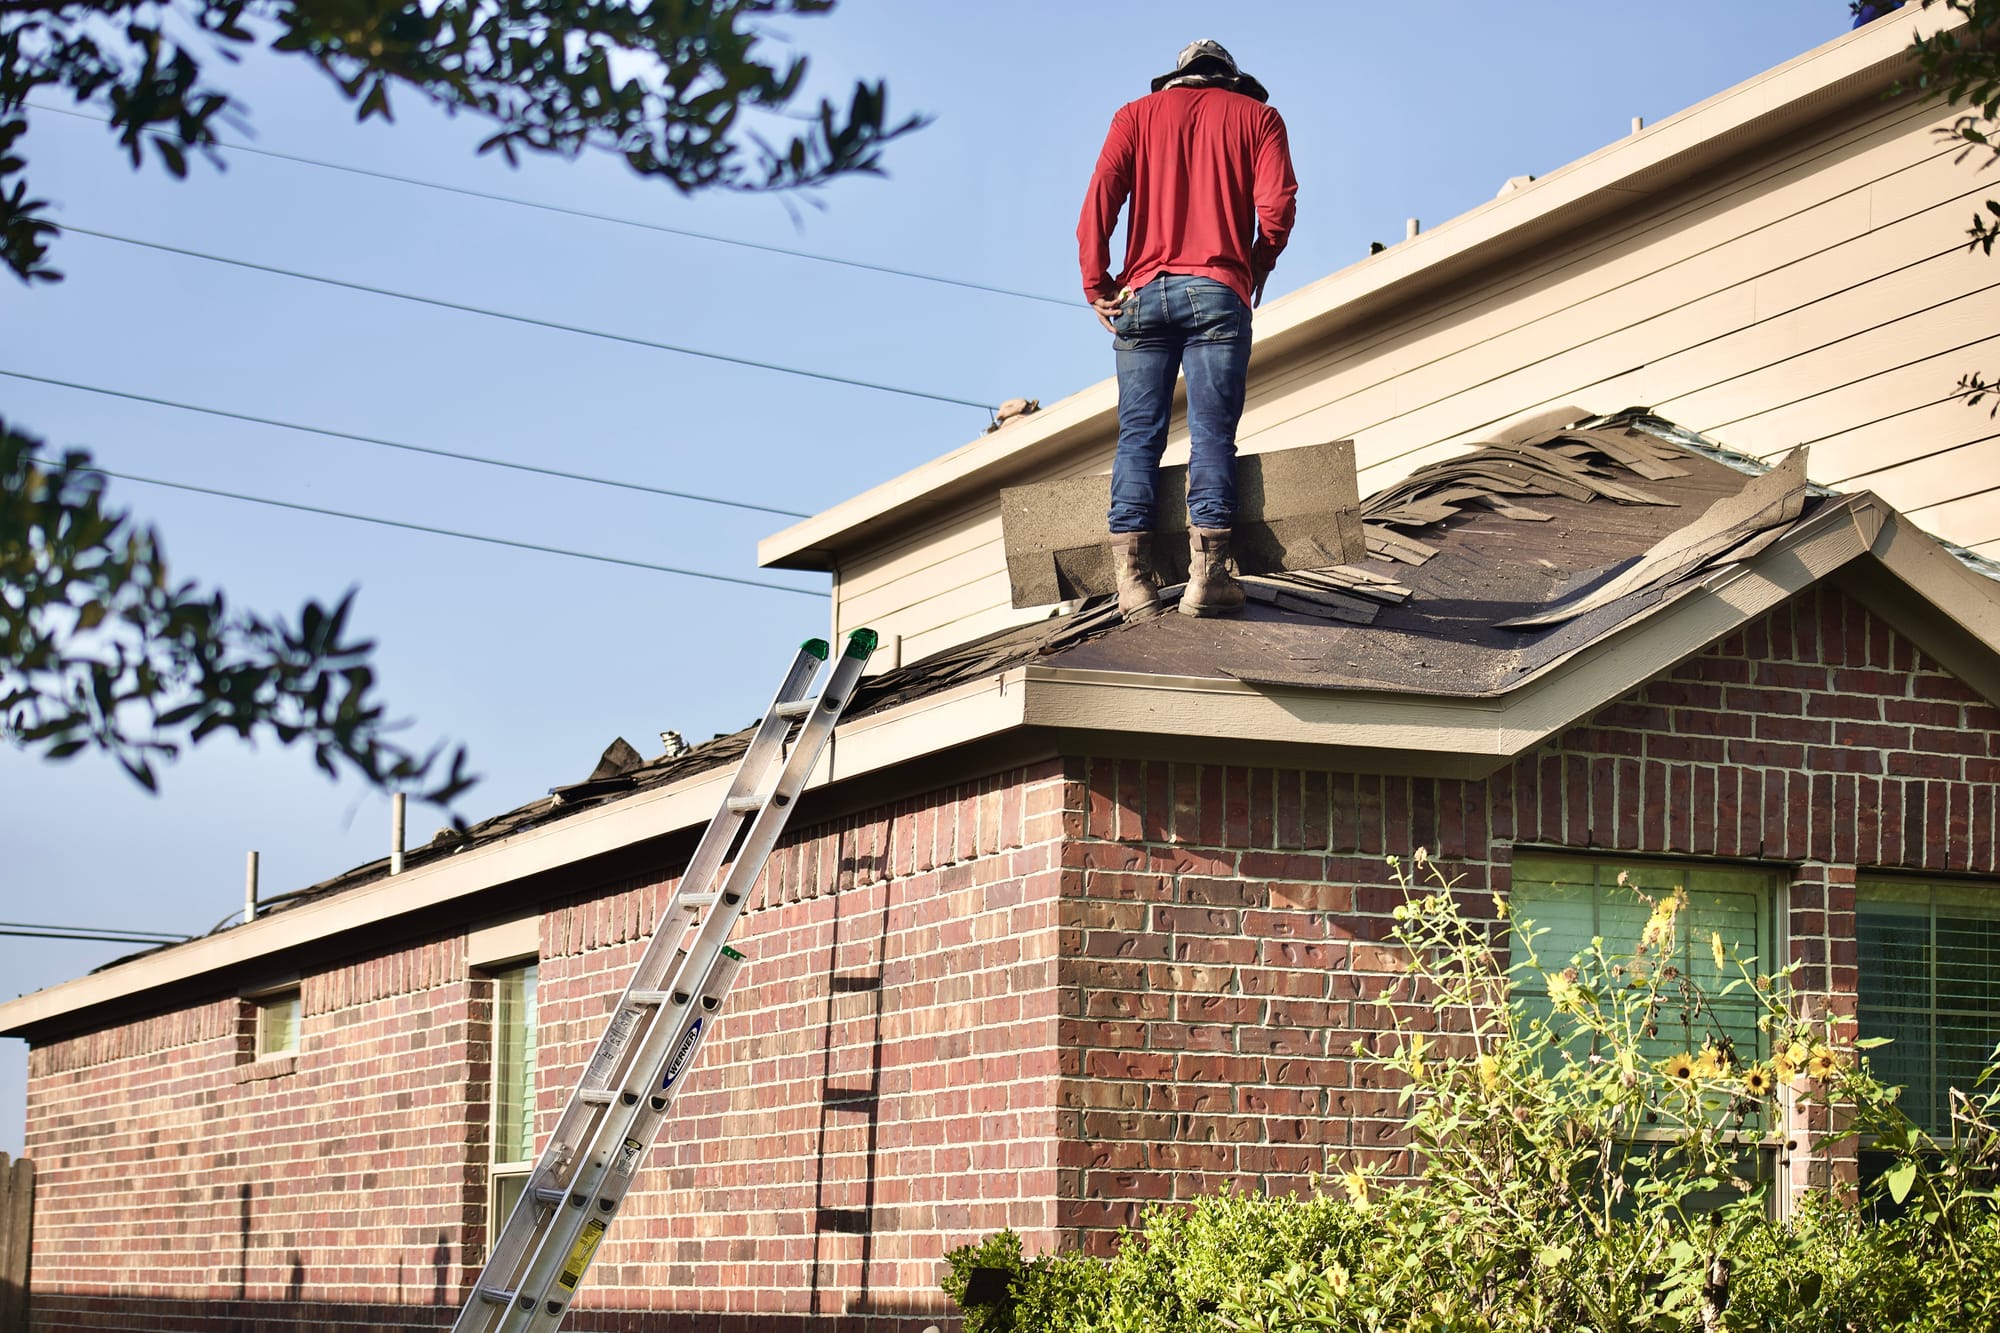 How to Make Sure You’re Hiring the Right Professional Roofer